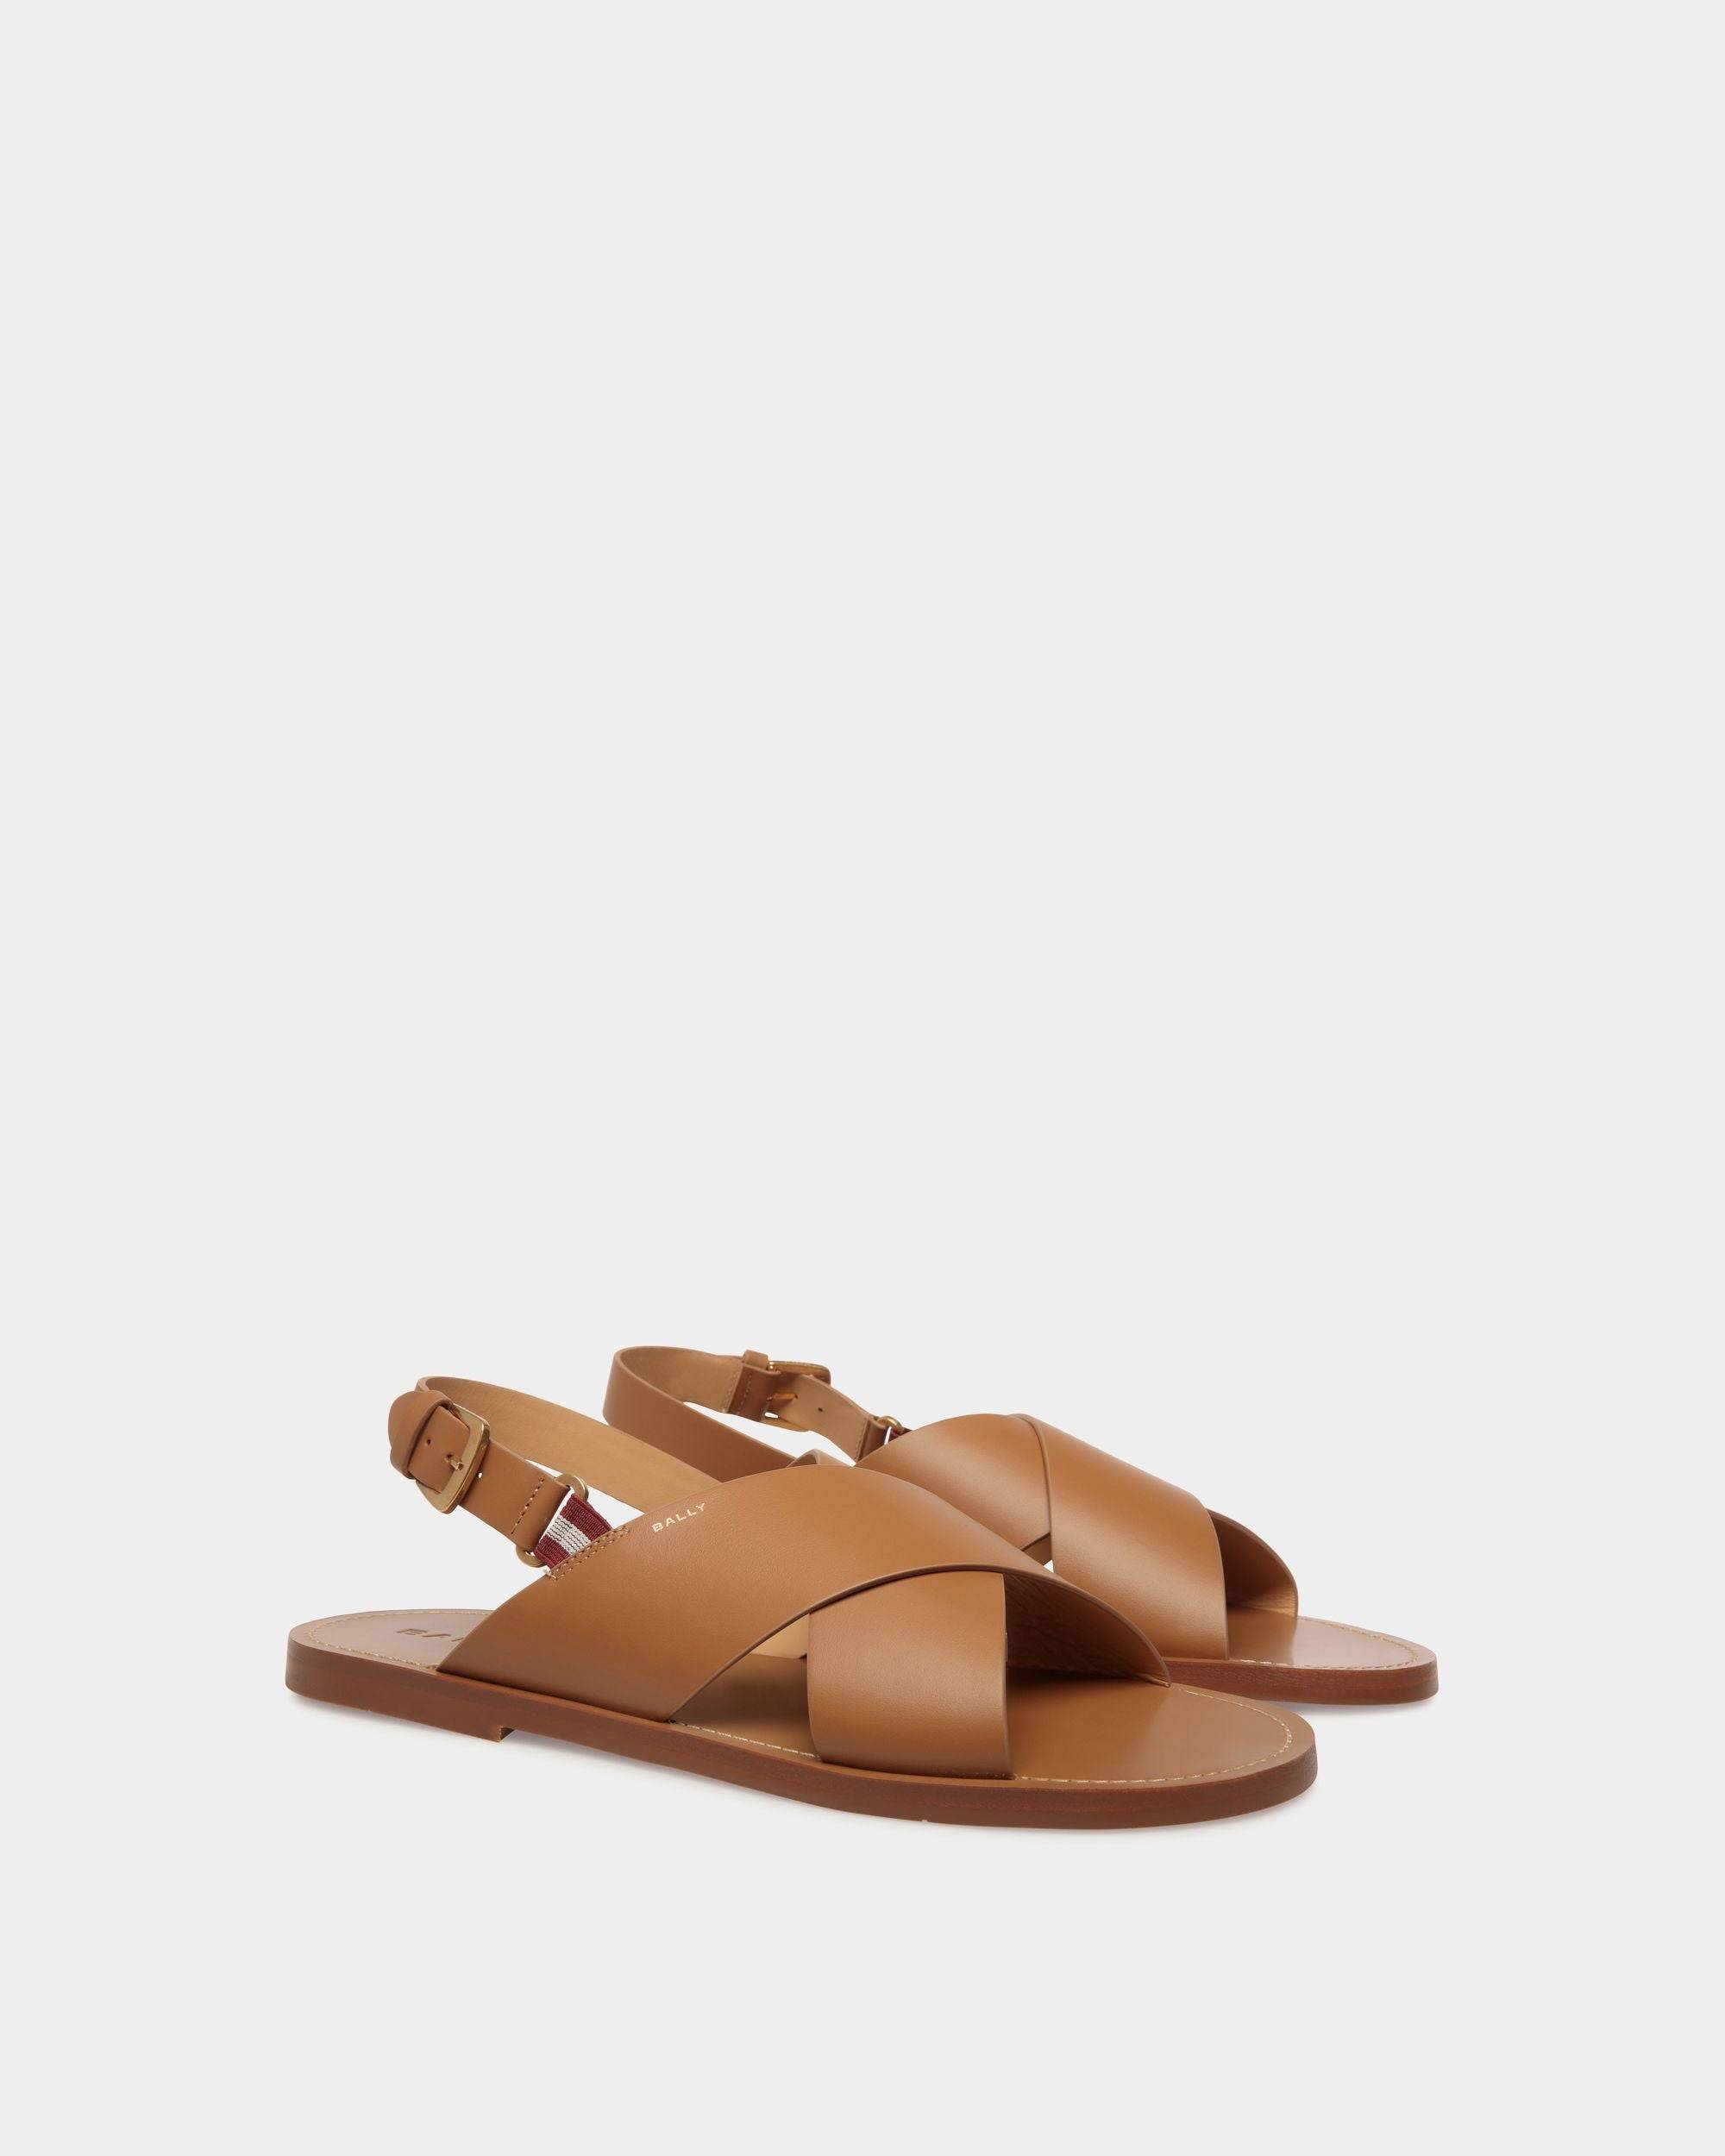 Chateau Sandal in Brown Leather - Men's - Bally - 03